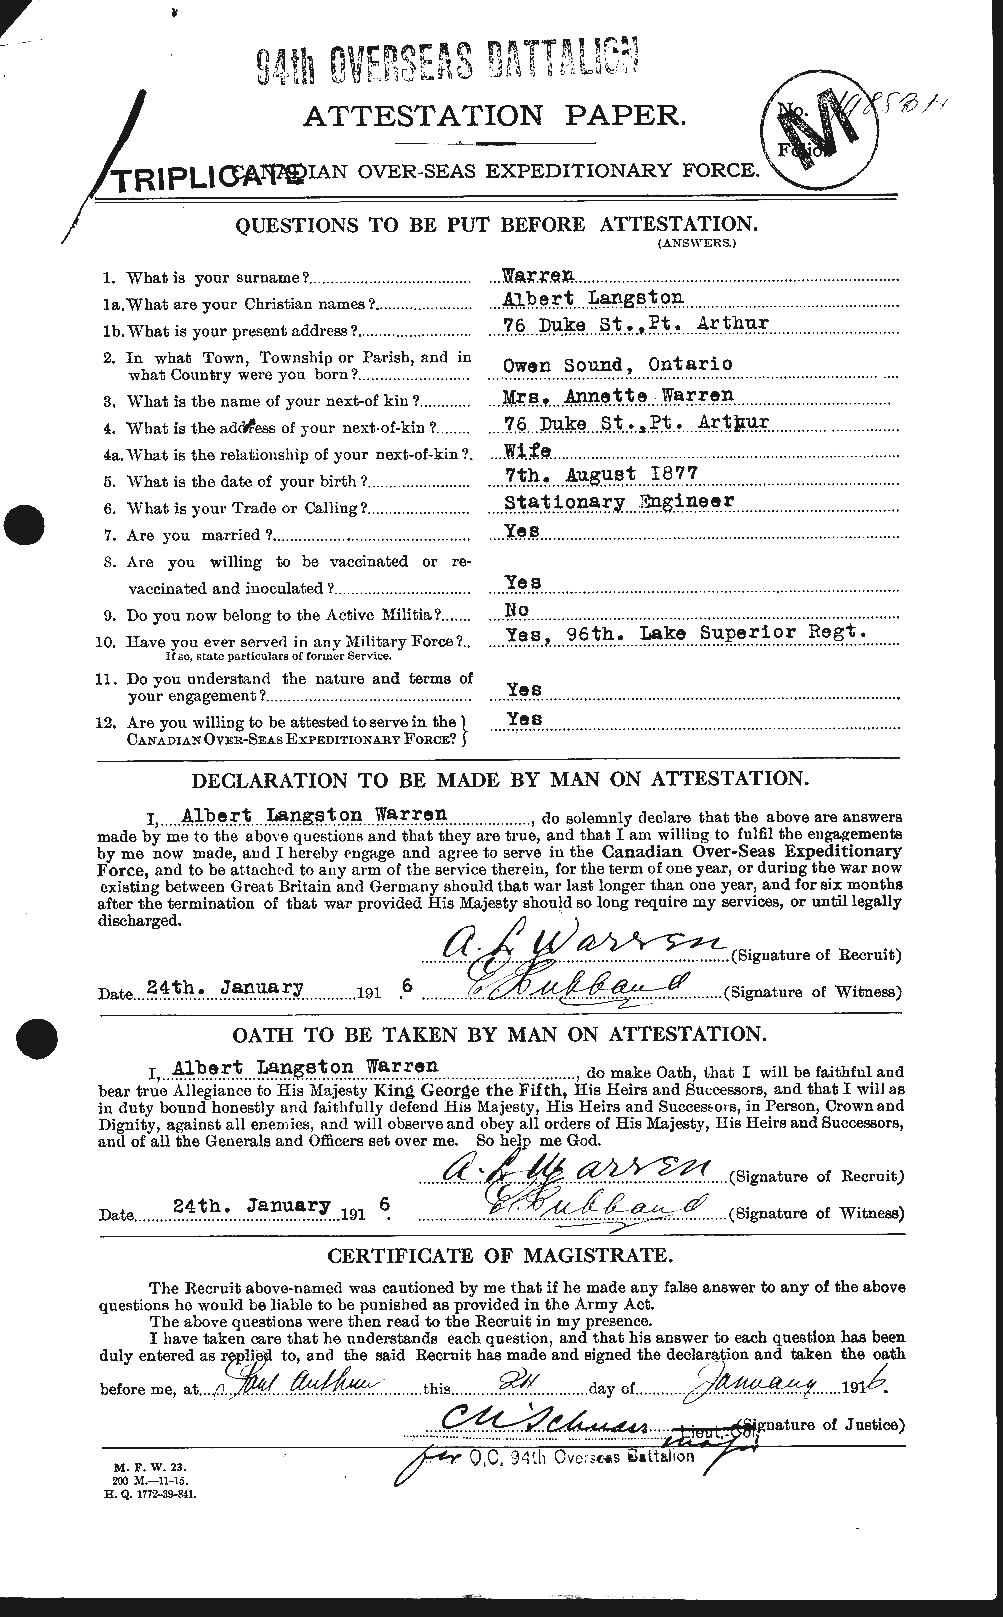 Personnel Records of the First World War - CEF 658341a